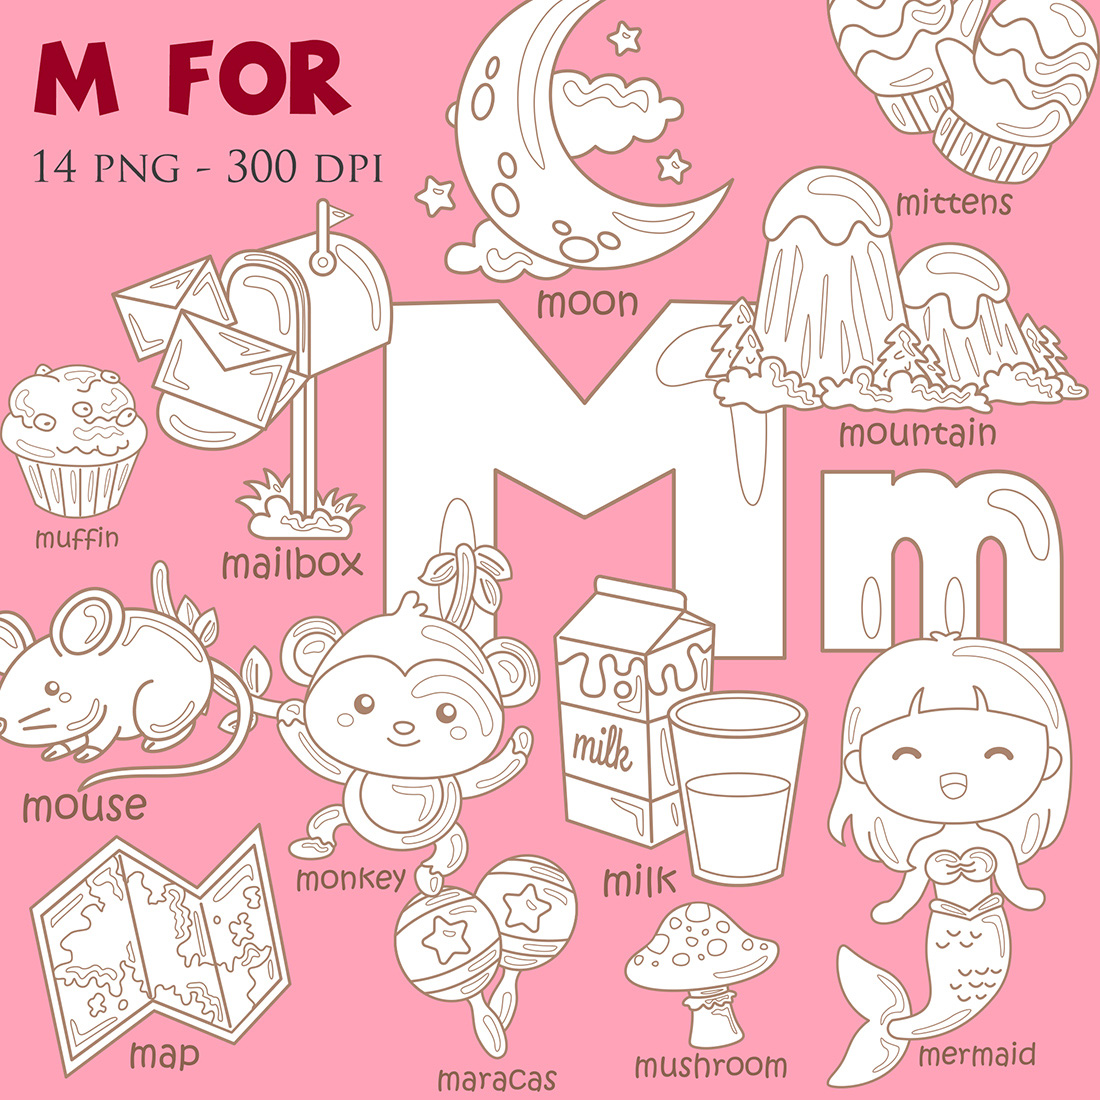 Alphabet M For Vocabulary School Letter Reading Writing Font Study Learning Student Toodler Kids Cartoon Mouse Monkey Mermaid Mountain Milk Mushroom Mittens Mailbox Moon Maracas Muffin Map Digital Stamp Outline Black and White cover image.